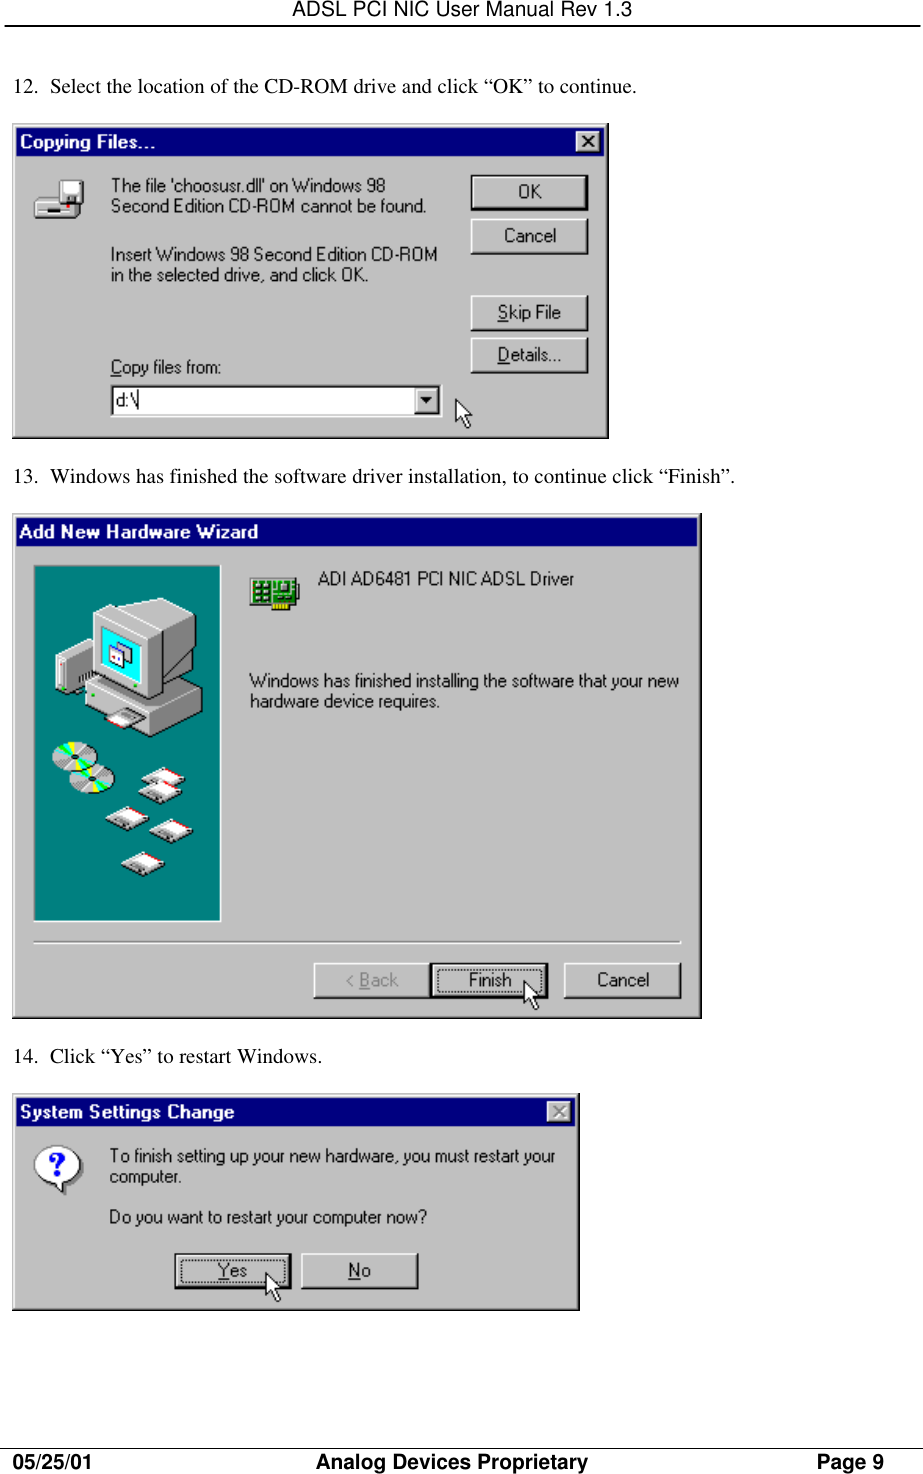 ADSL PCI NIC User Manual Rev 1.305/25/01                                     Analog Devices Proprietary                                      Page 912. Select the location of the CD-ROM drive and click “OK” to continue.13. Windows has finished the software driver installation, to continue click “Finish”.14. Click “Yes” to restart Windows.